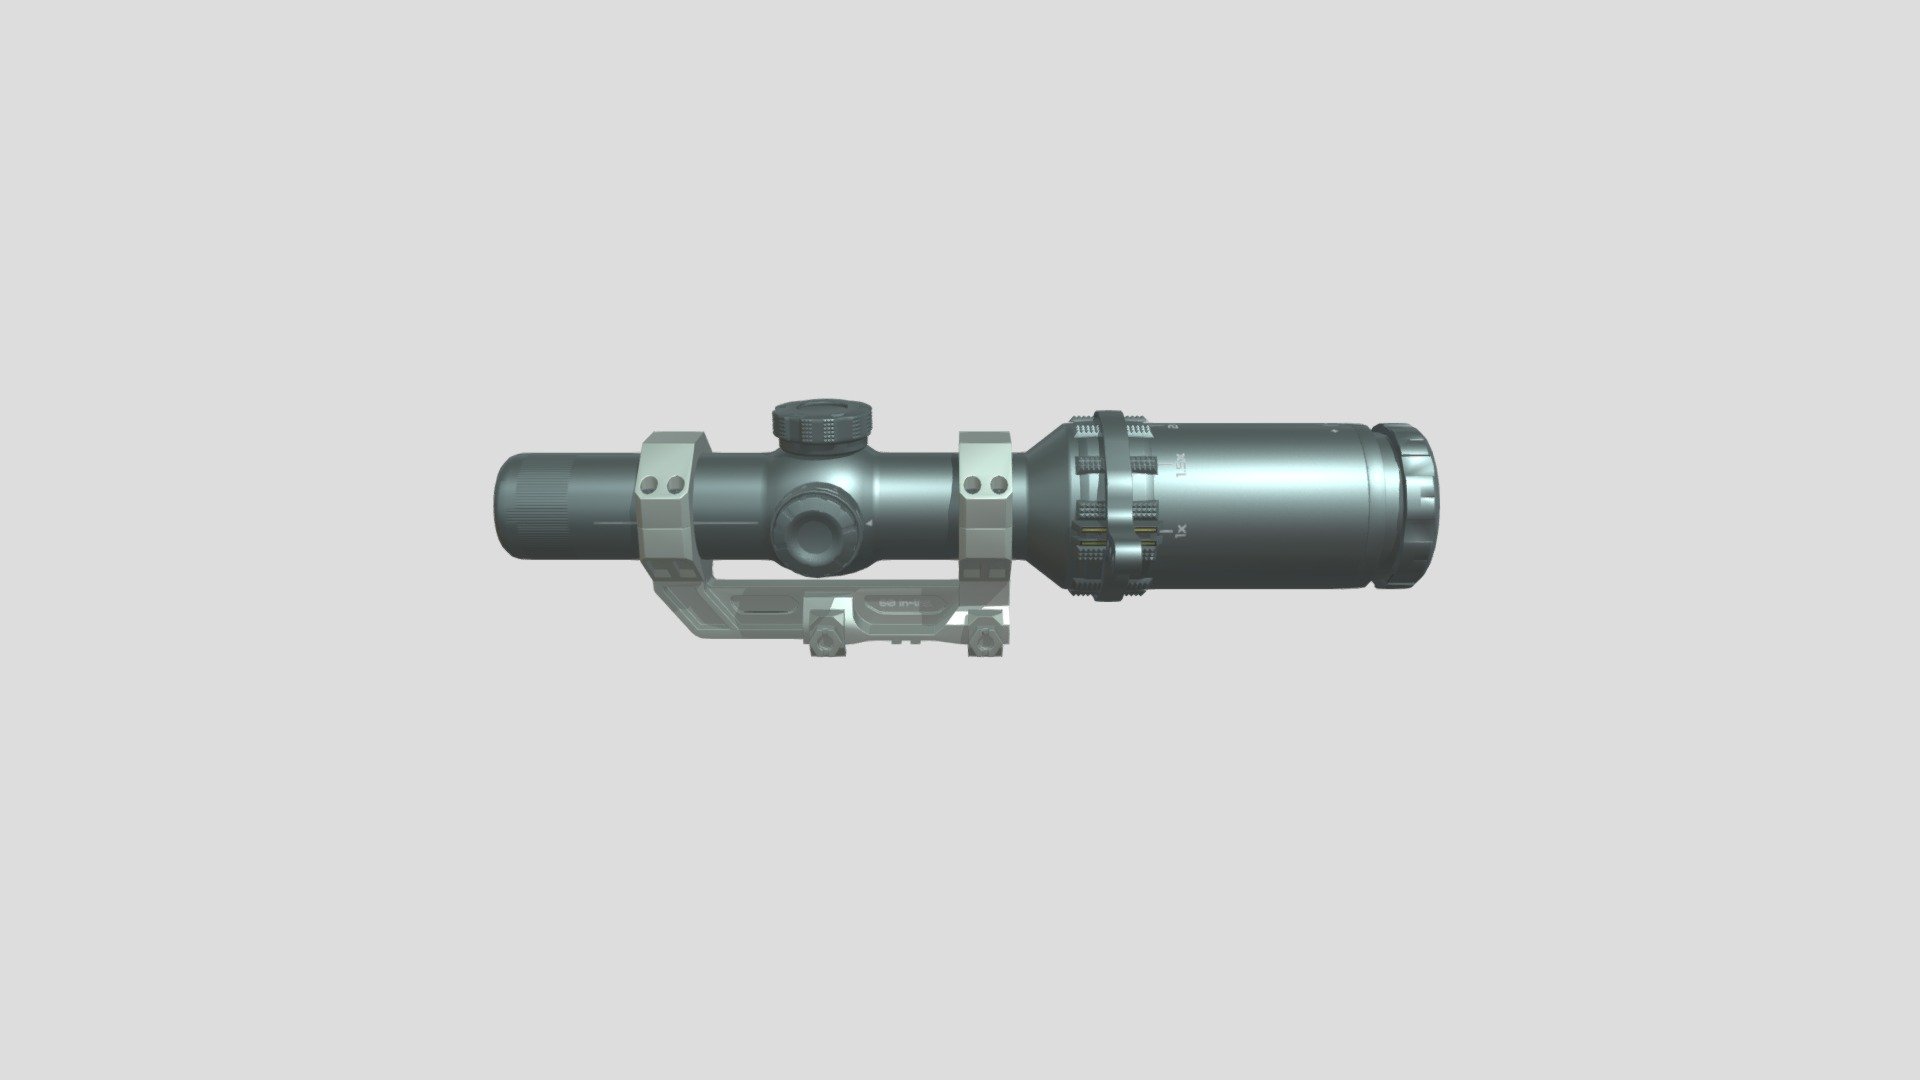 Snioer scope is 3d low poly model. It has 4 textures, all of them packed into the Blender file and in Textures.zip 72792 polygons 72437 vertices Ready for render - Sniper Scope - 3D model by archipovilya 3d model